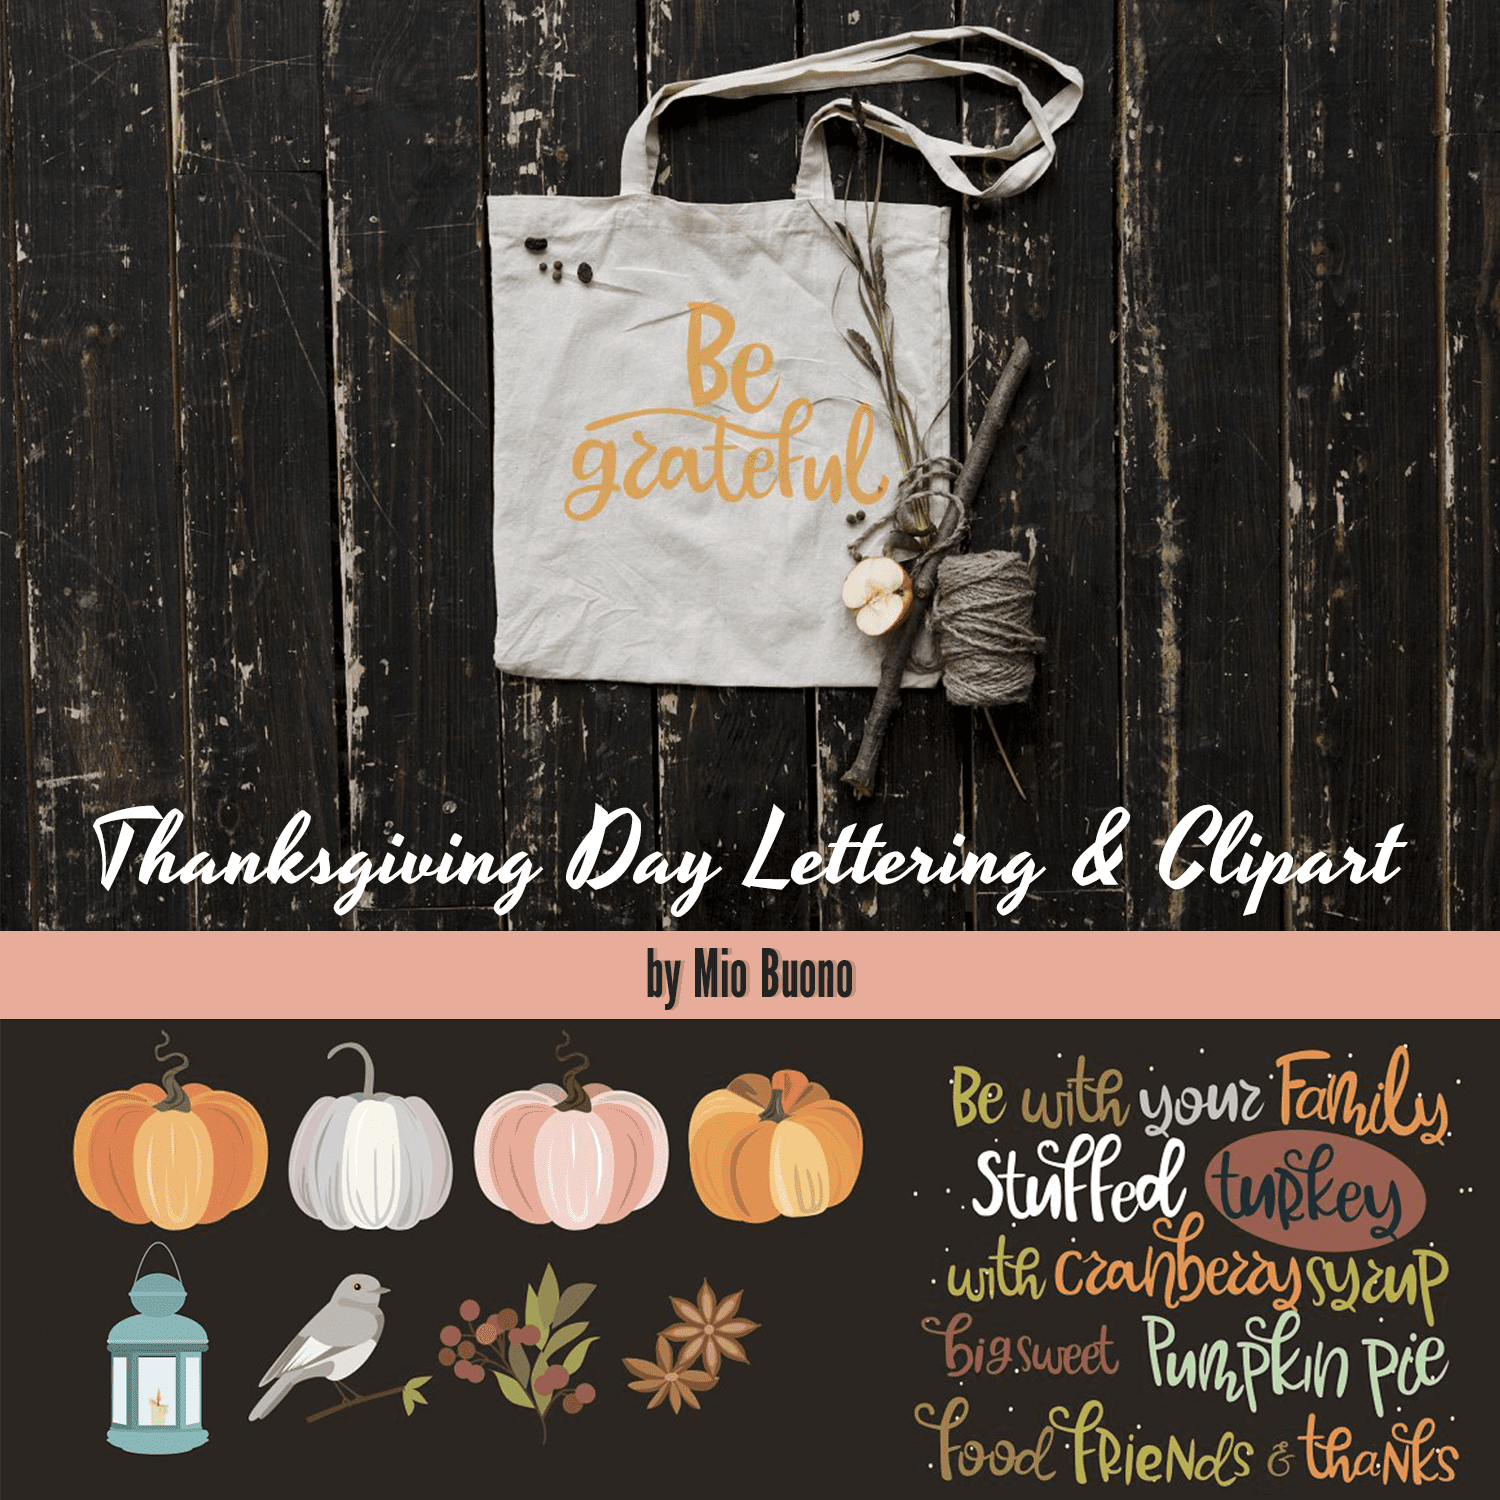 Thanksgiving Day Lettering & Clipart cover.